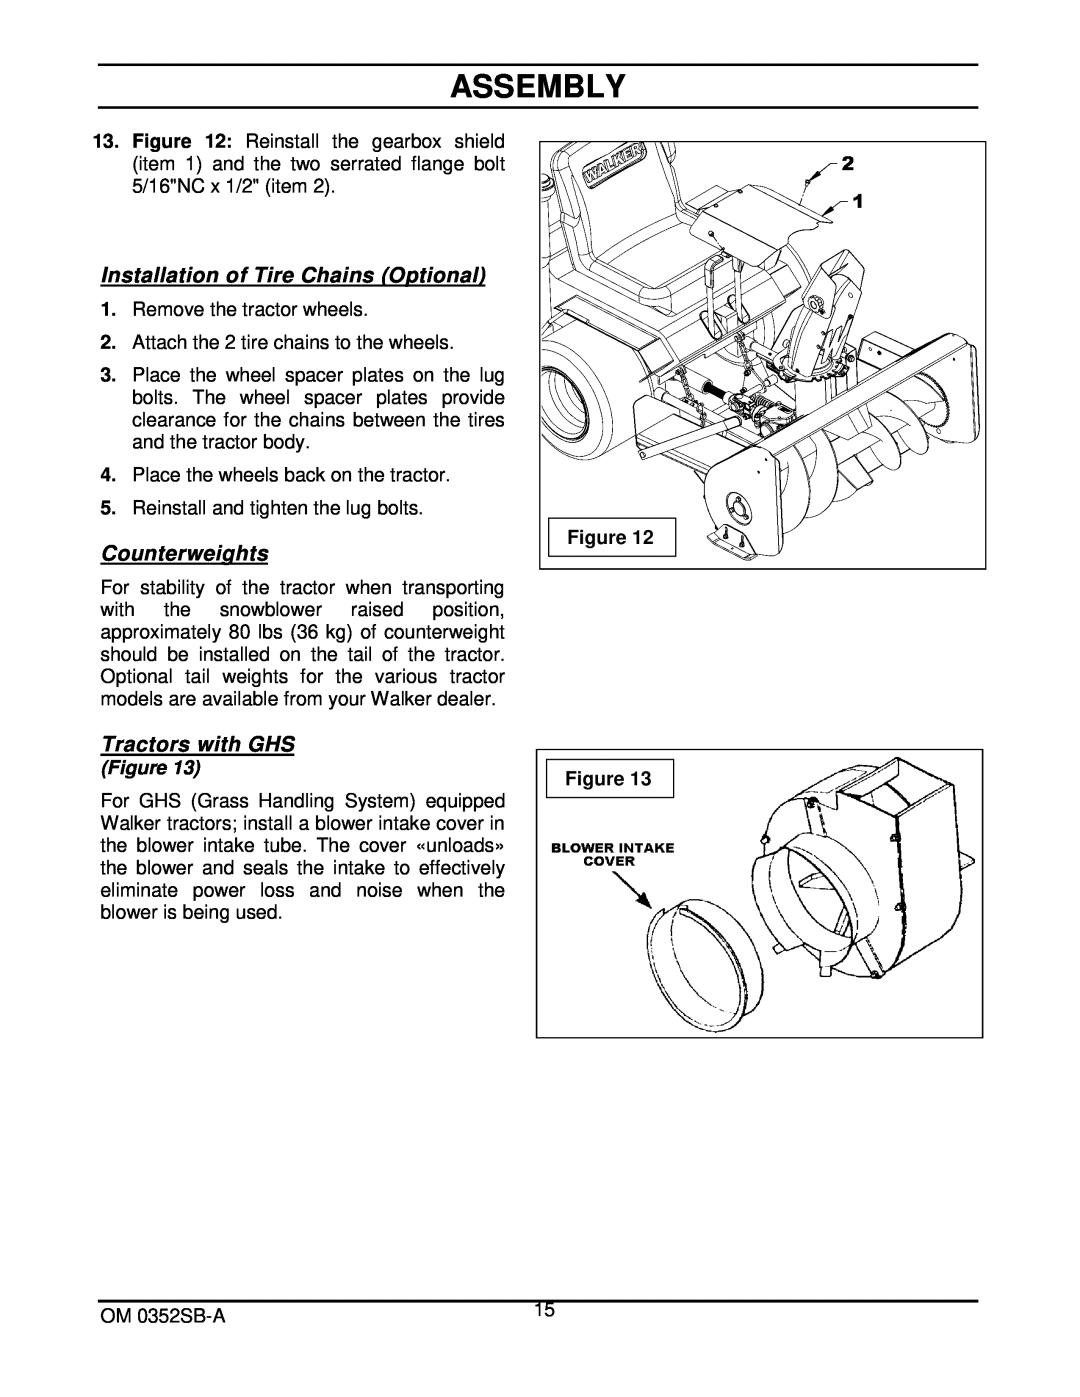 Walker 5600-20 manual Assembly, Installation of Tire Chains Optional, Counterweights, Tractors with GHS 